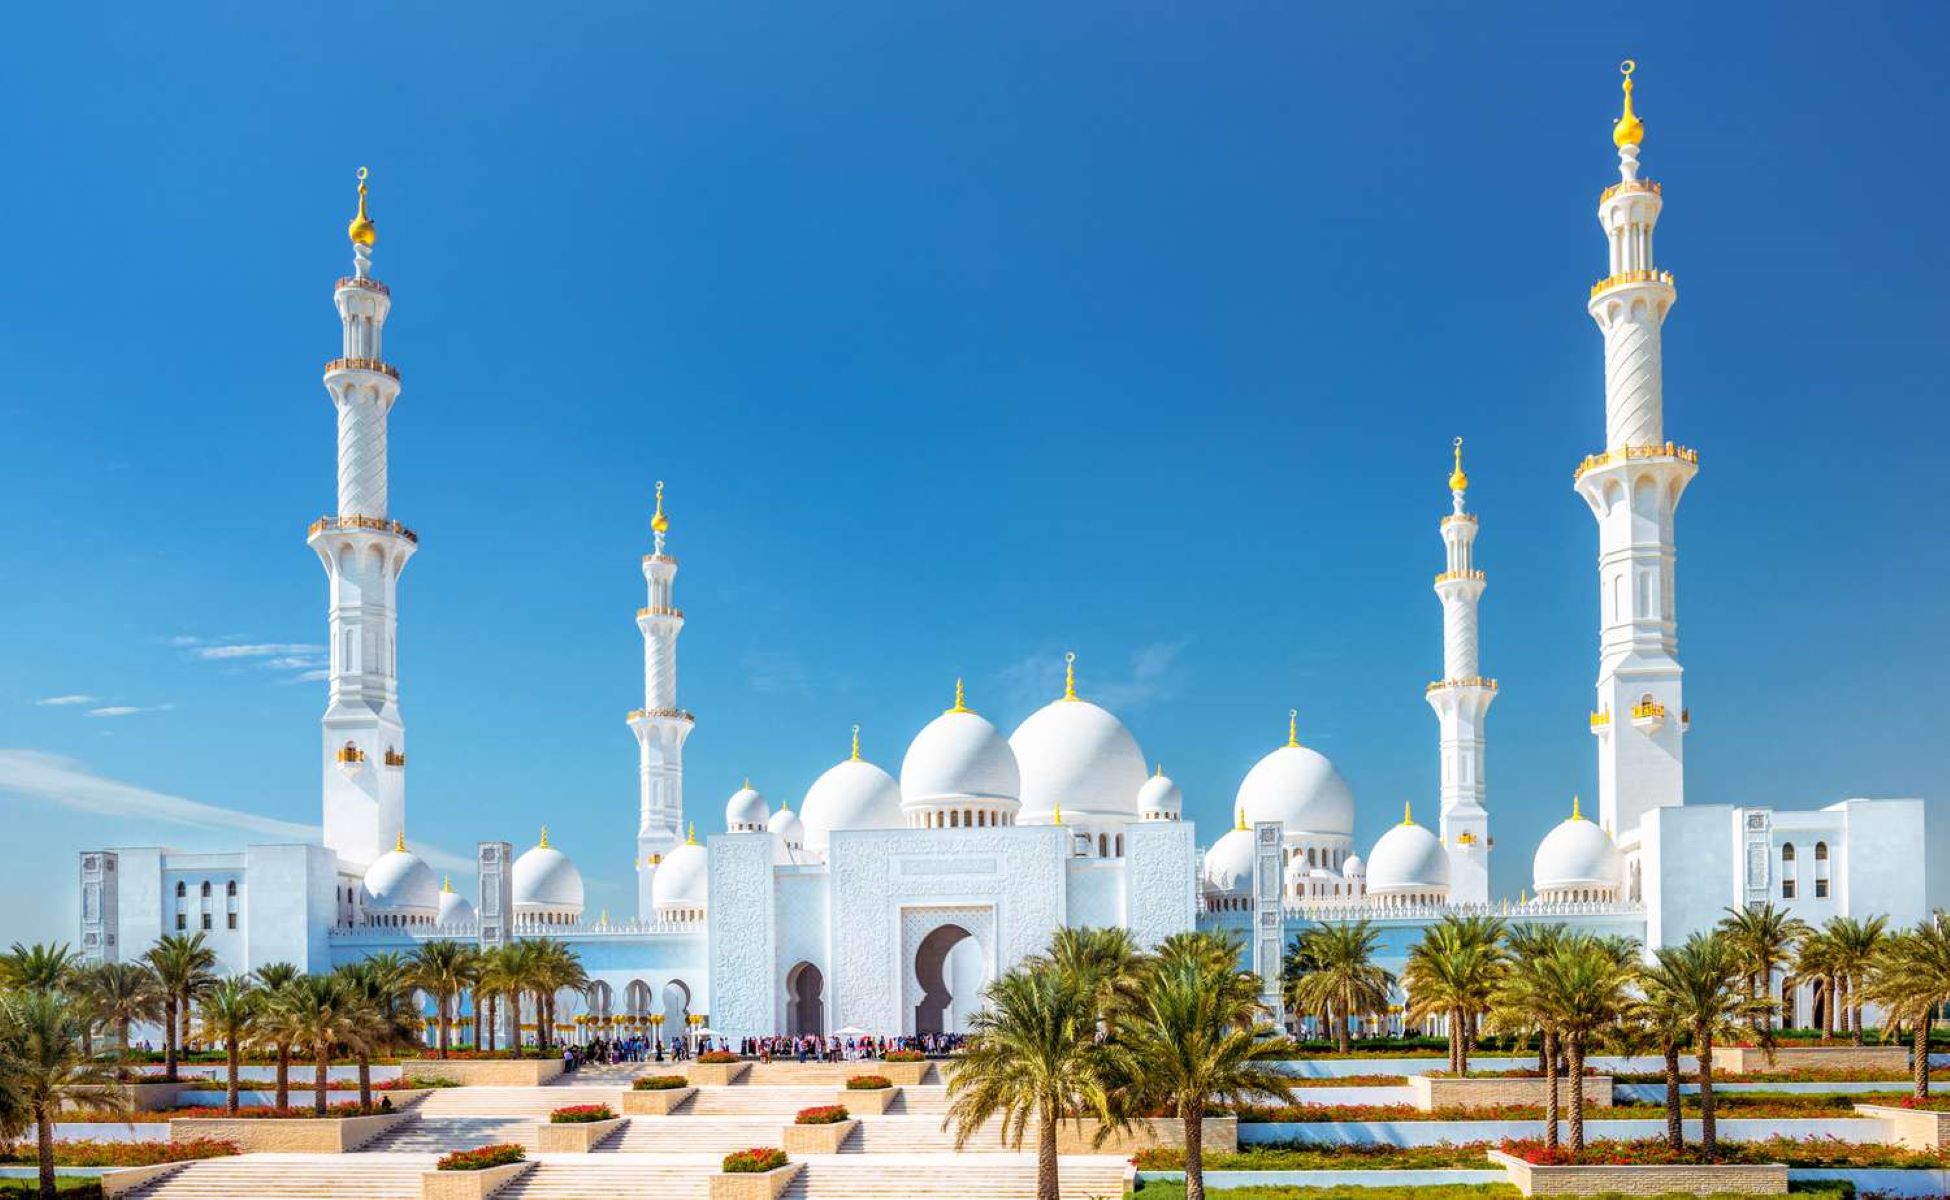 16-intriguing-facts-about-sheikh-zayed-grand-mosque